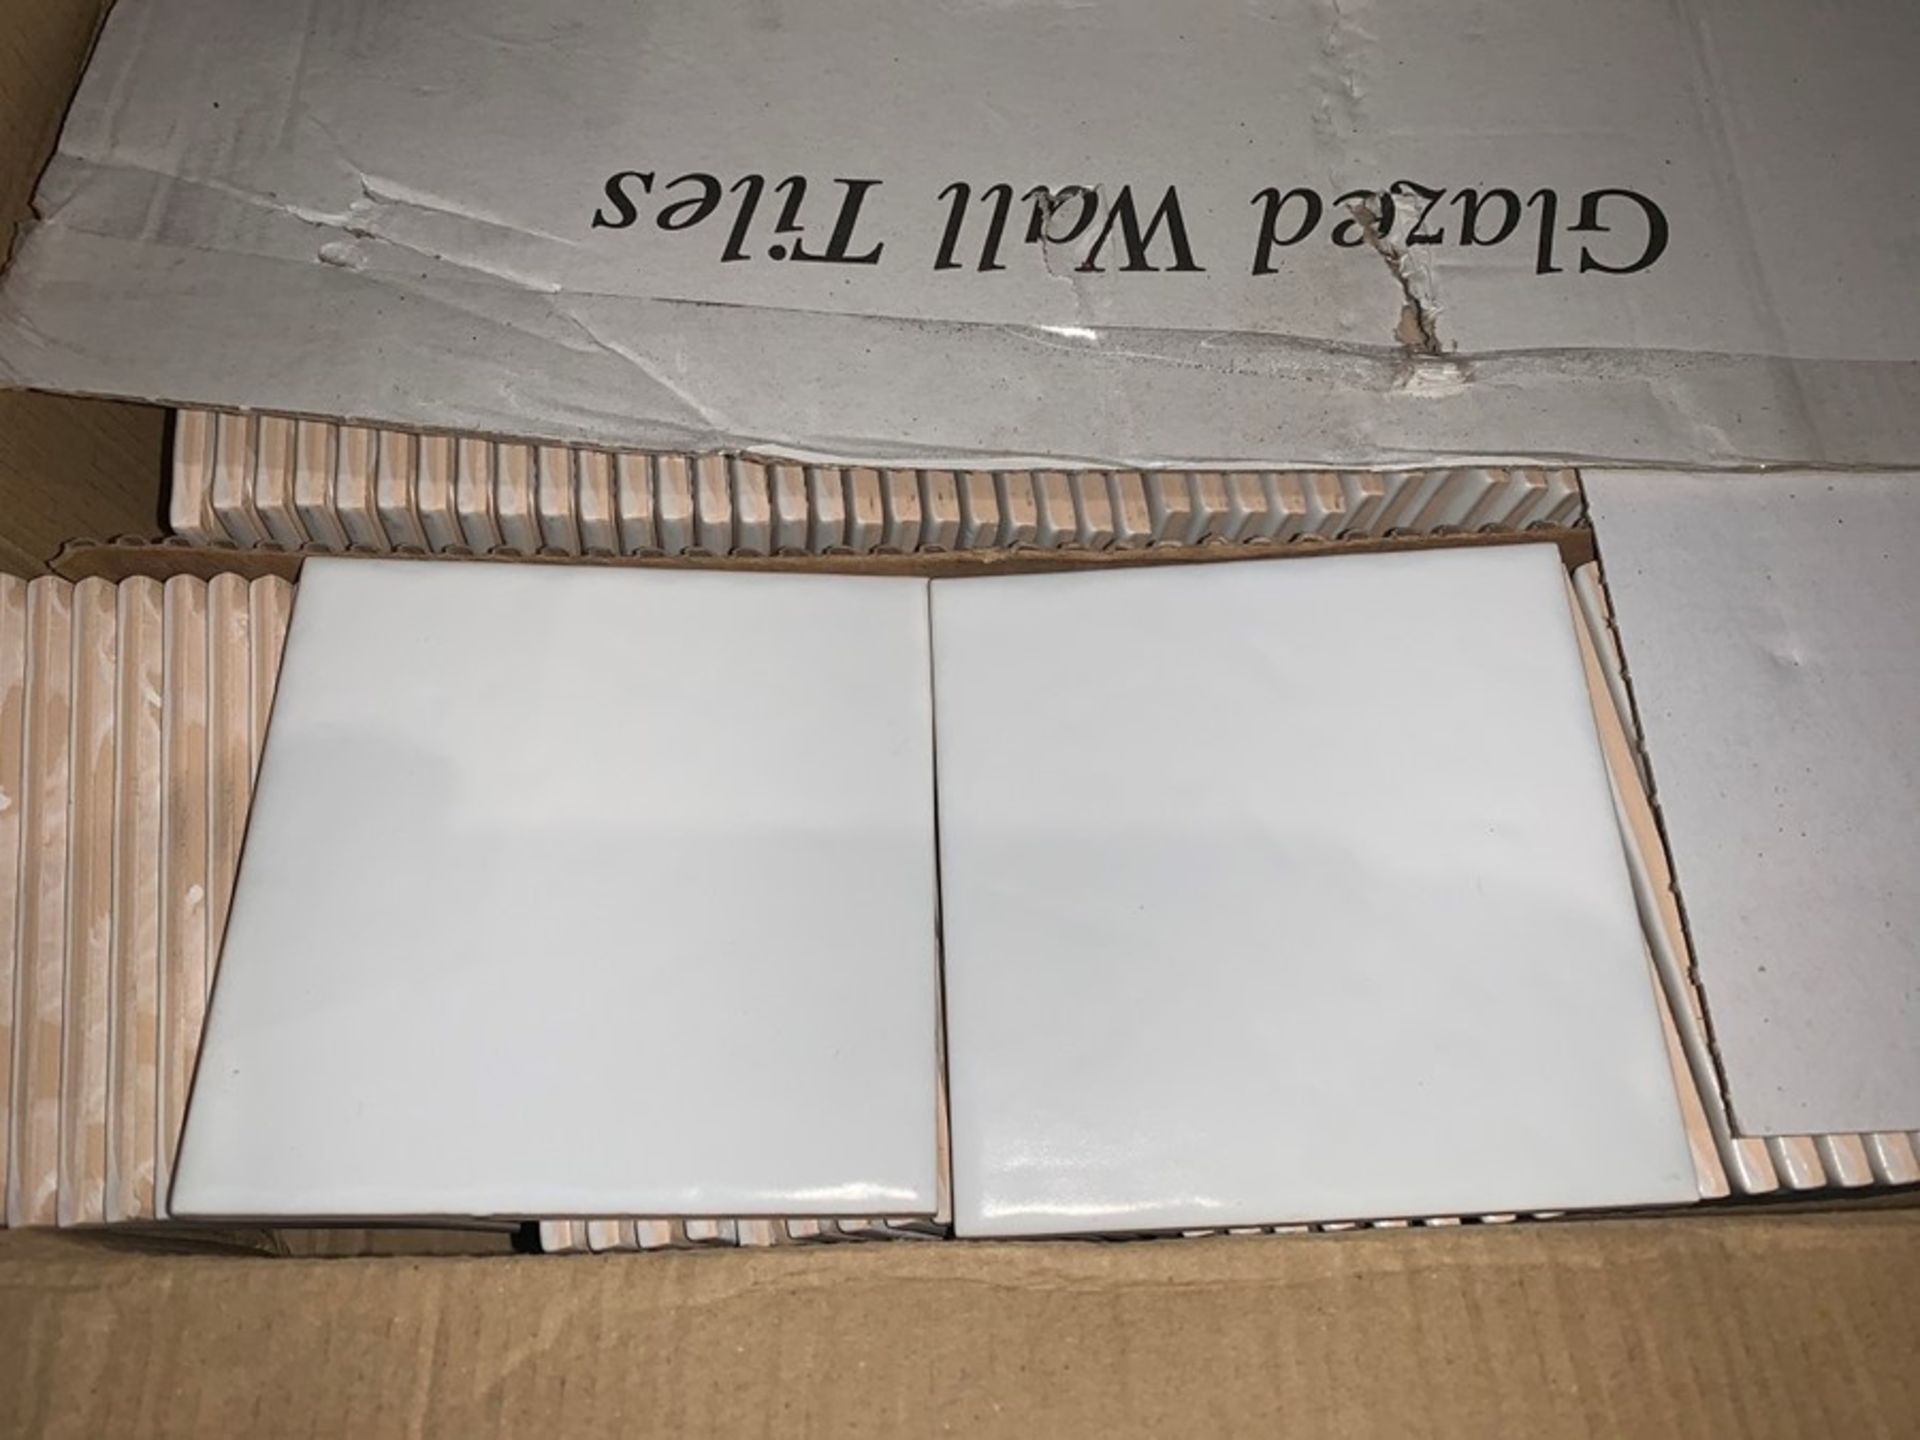 1 LOT TO CONTAIN 72 (APPROX) BOXES OF JOHNSON CERAMIC GLAZED COTSWOLD WALL TILES IN SHADED WHITE /